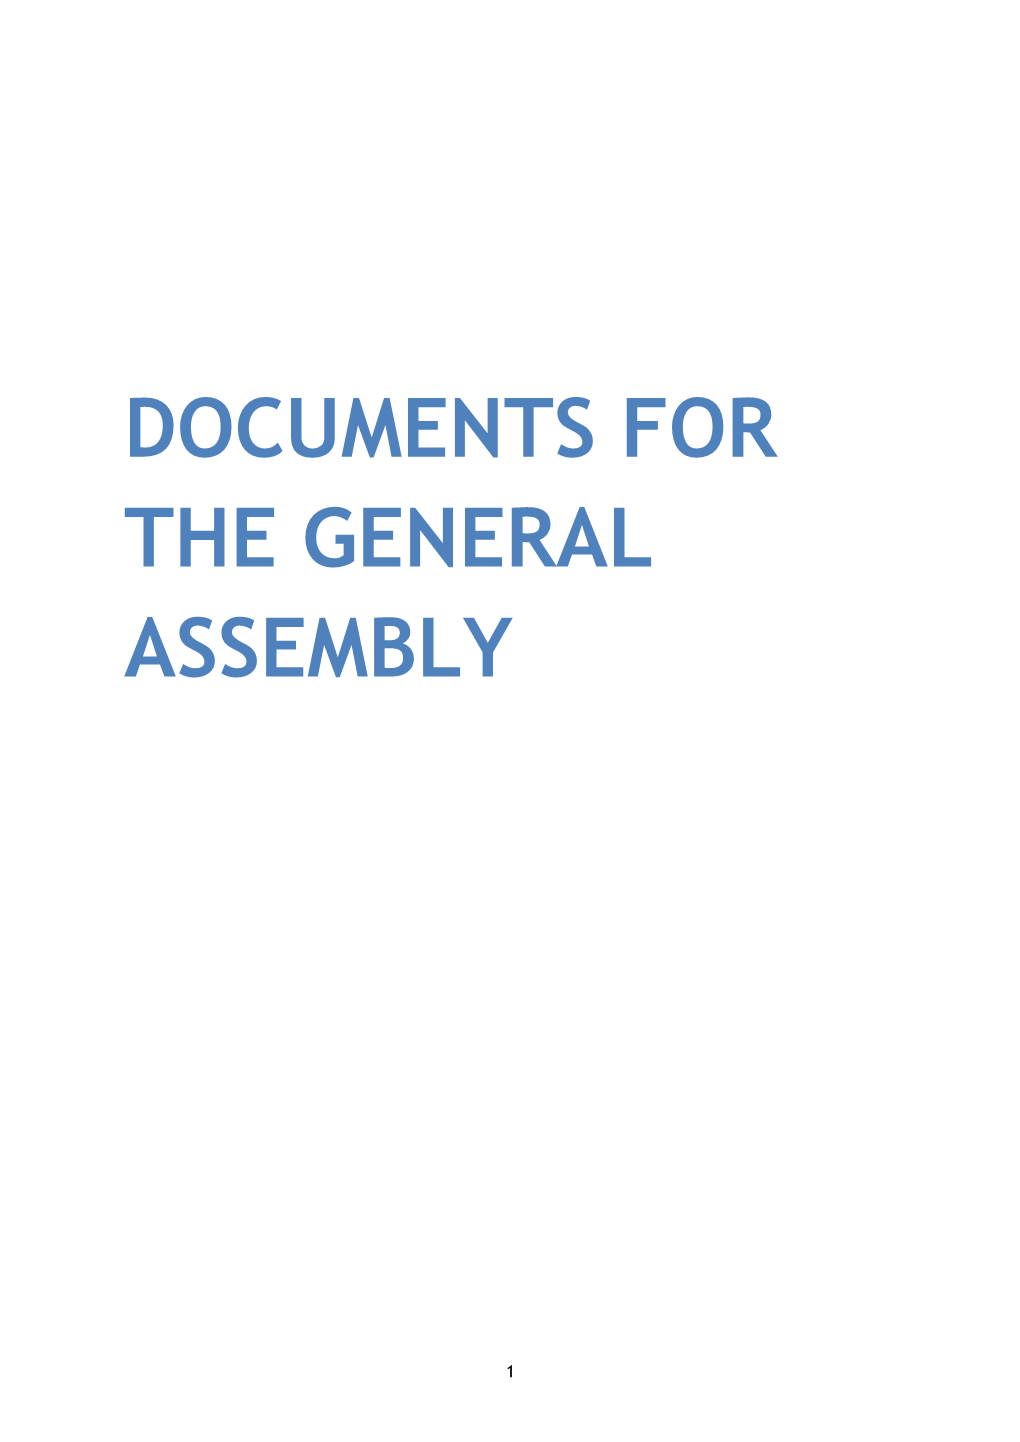 Documents for the General Assembly